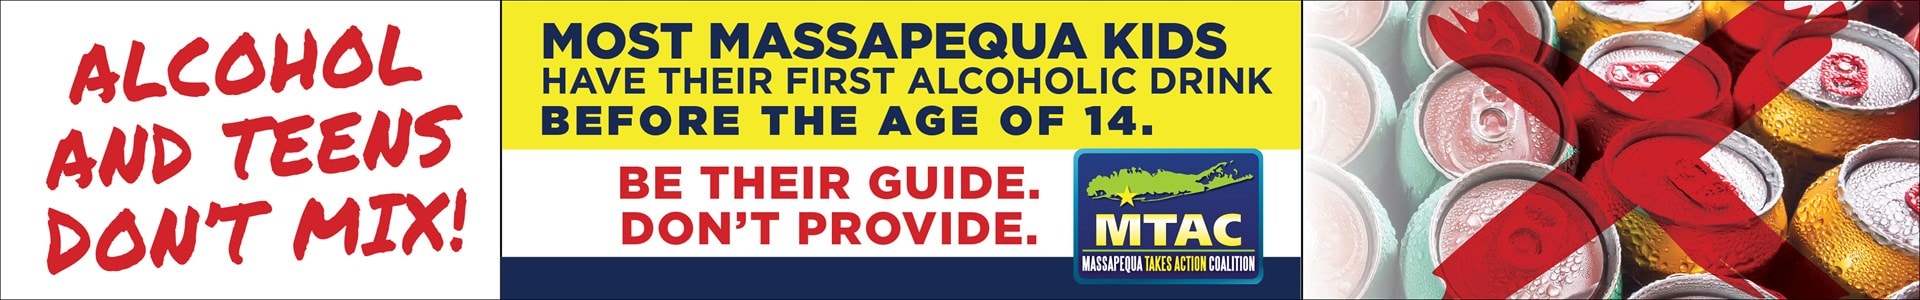 Massapequa Takes Action - Teens and Alcohol Don't Mix 